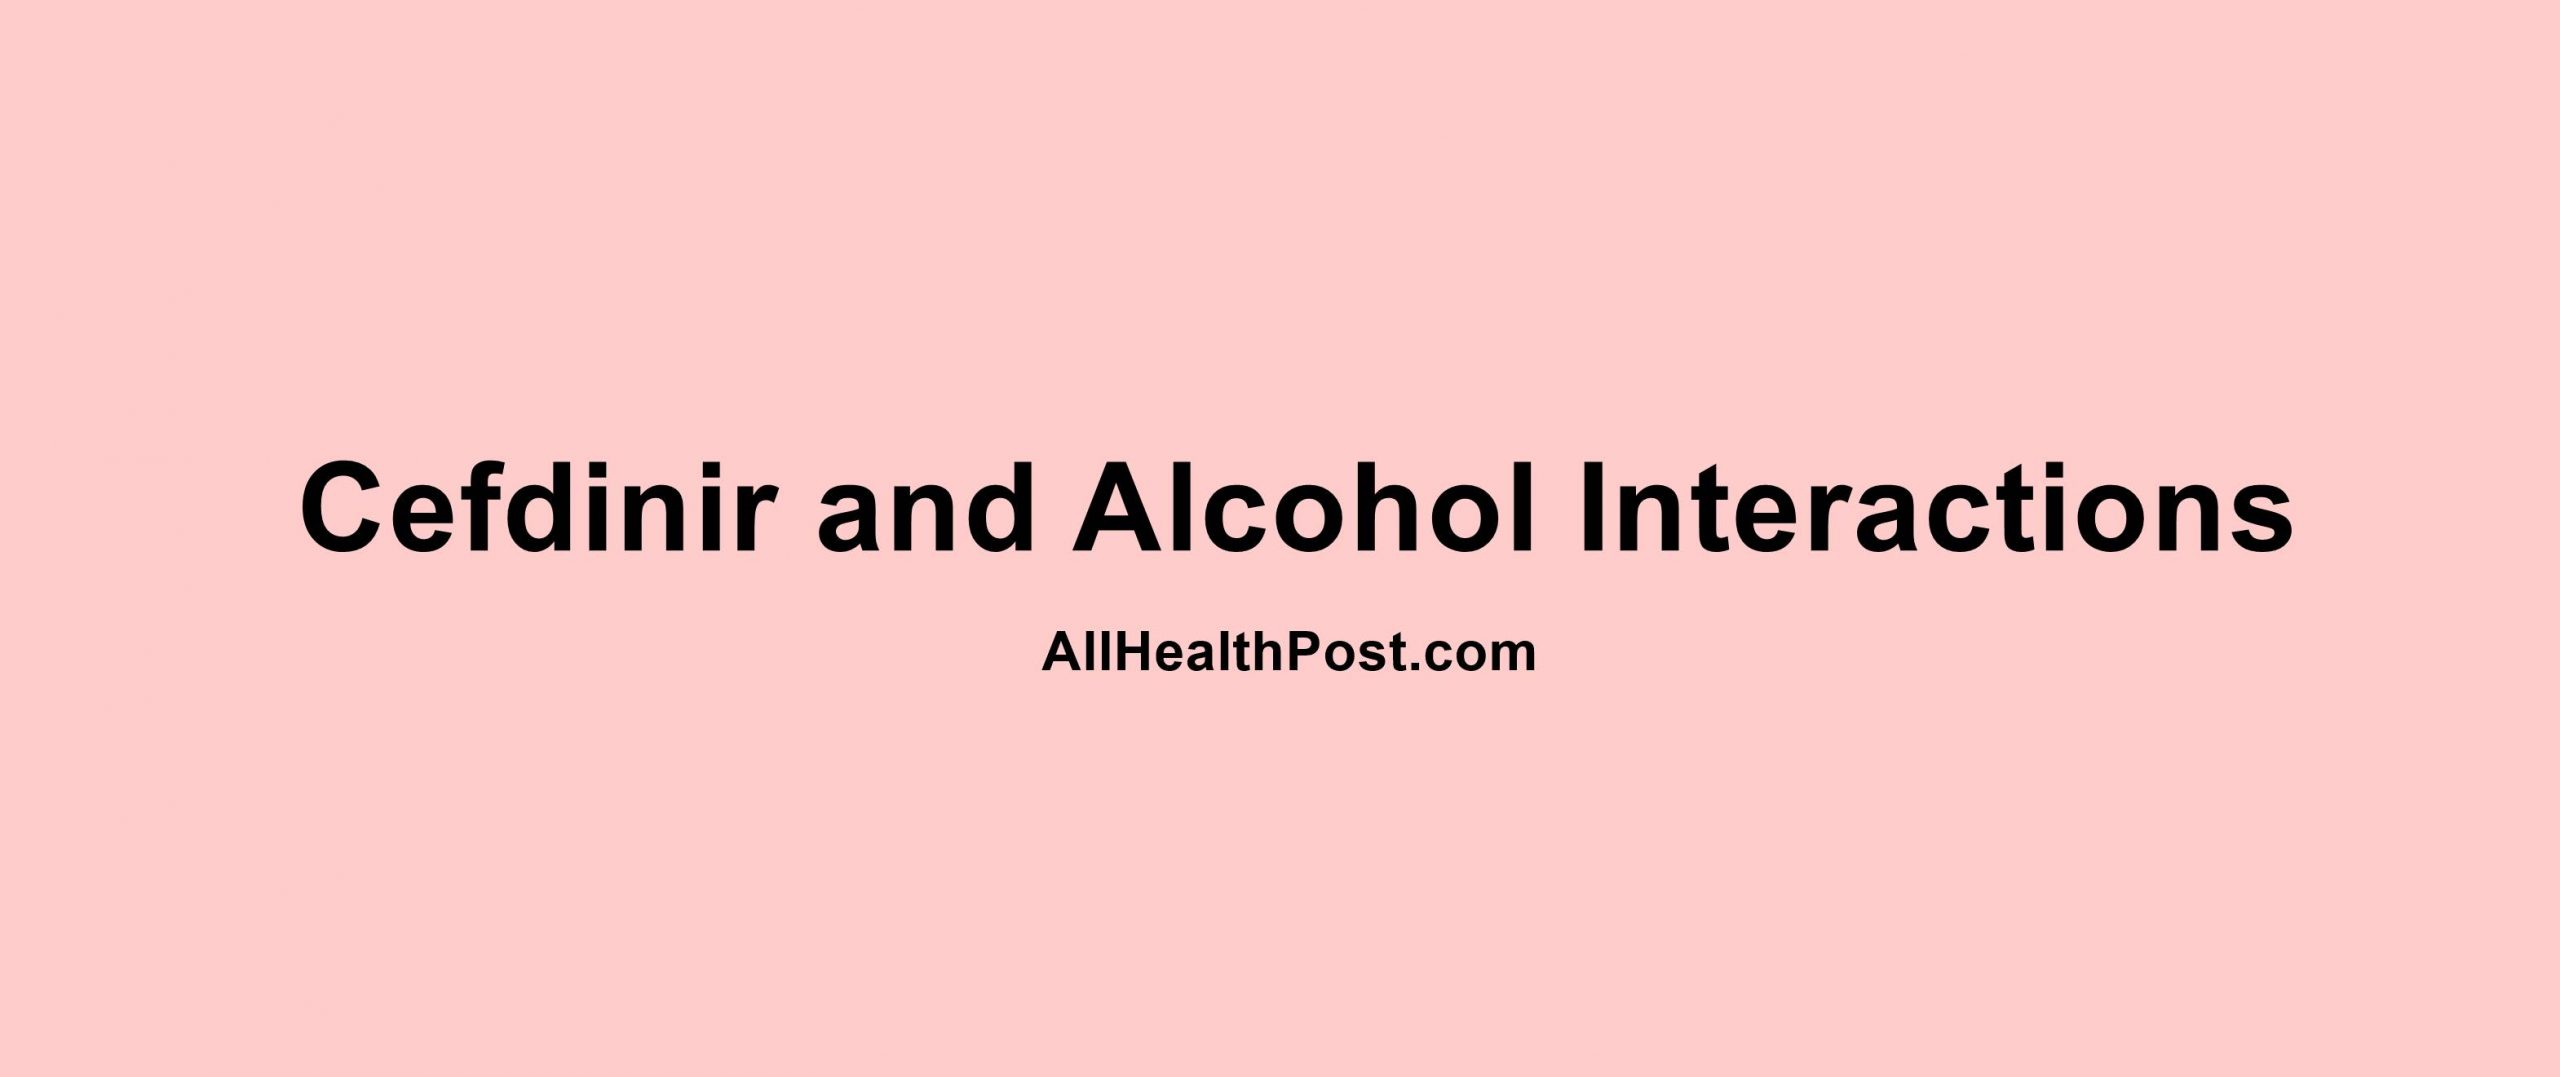 Cefdinir and Alcohol Interactions